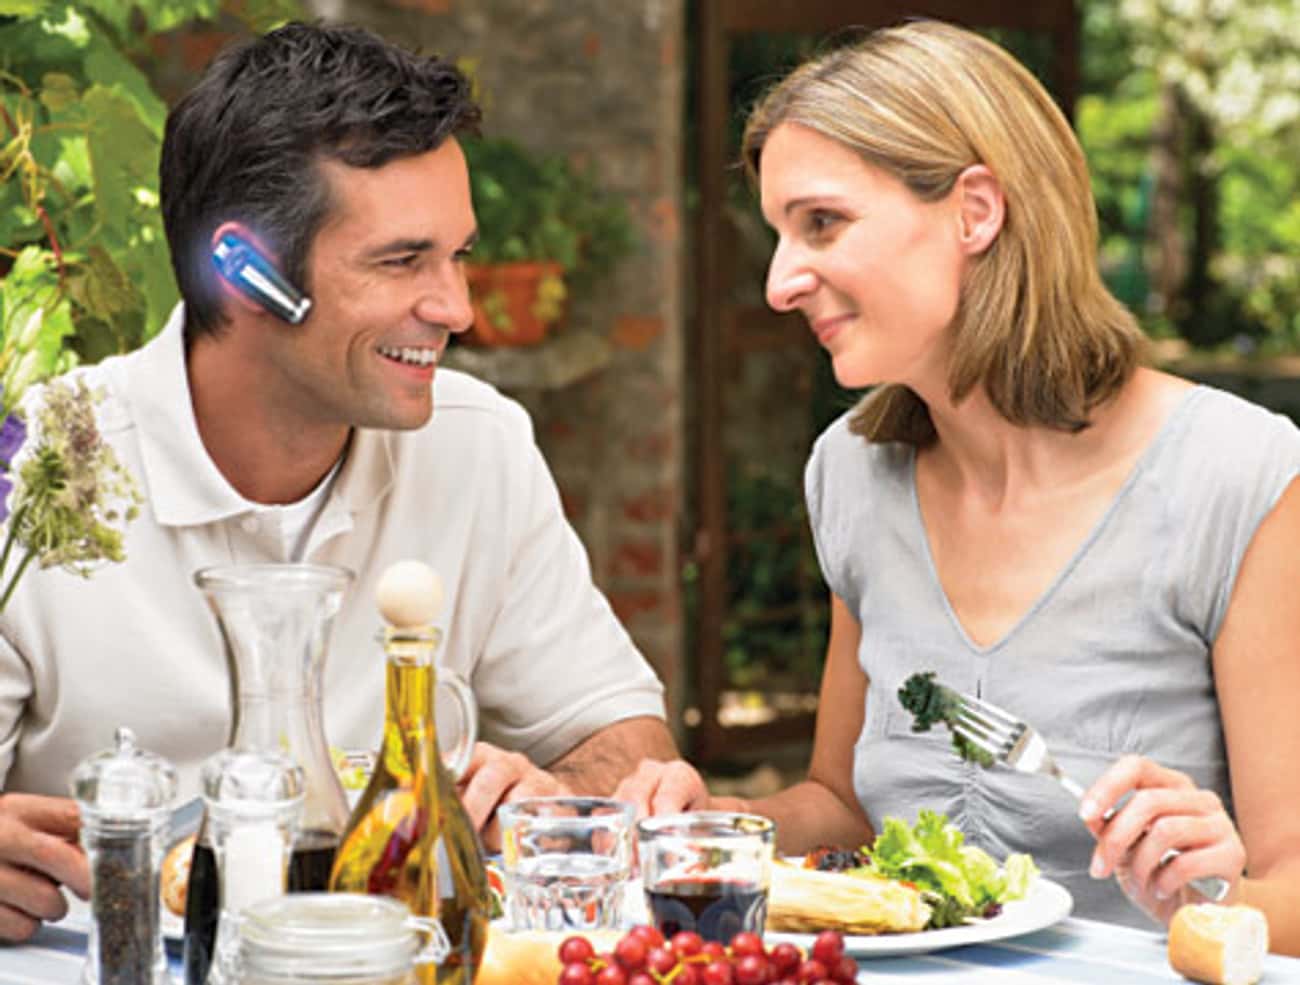 Wearing a Bluetooth While Eating at a Restaurant